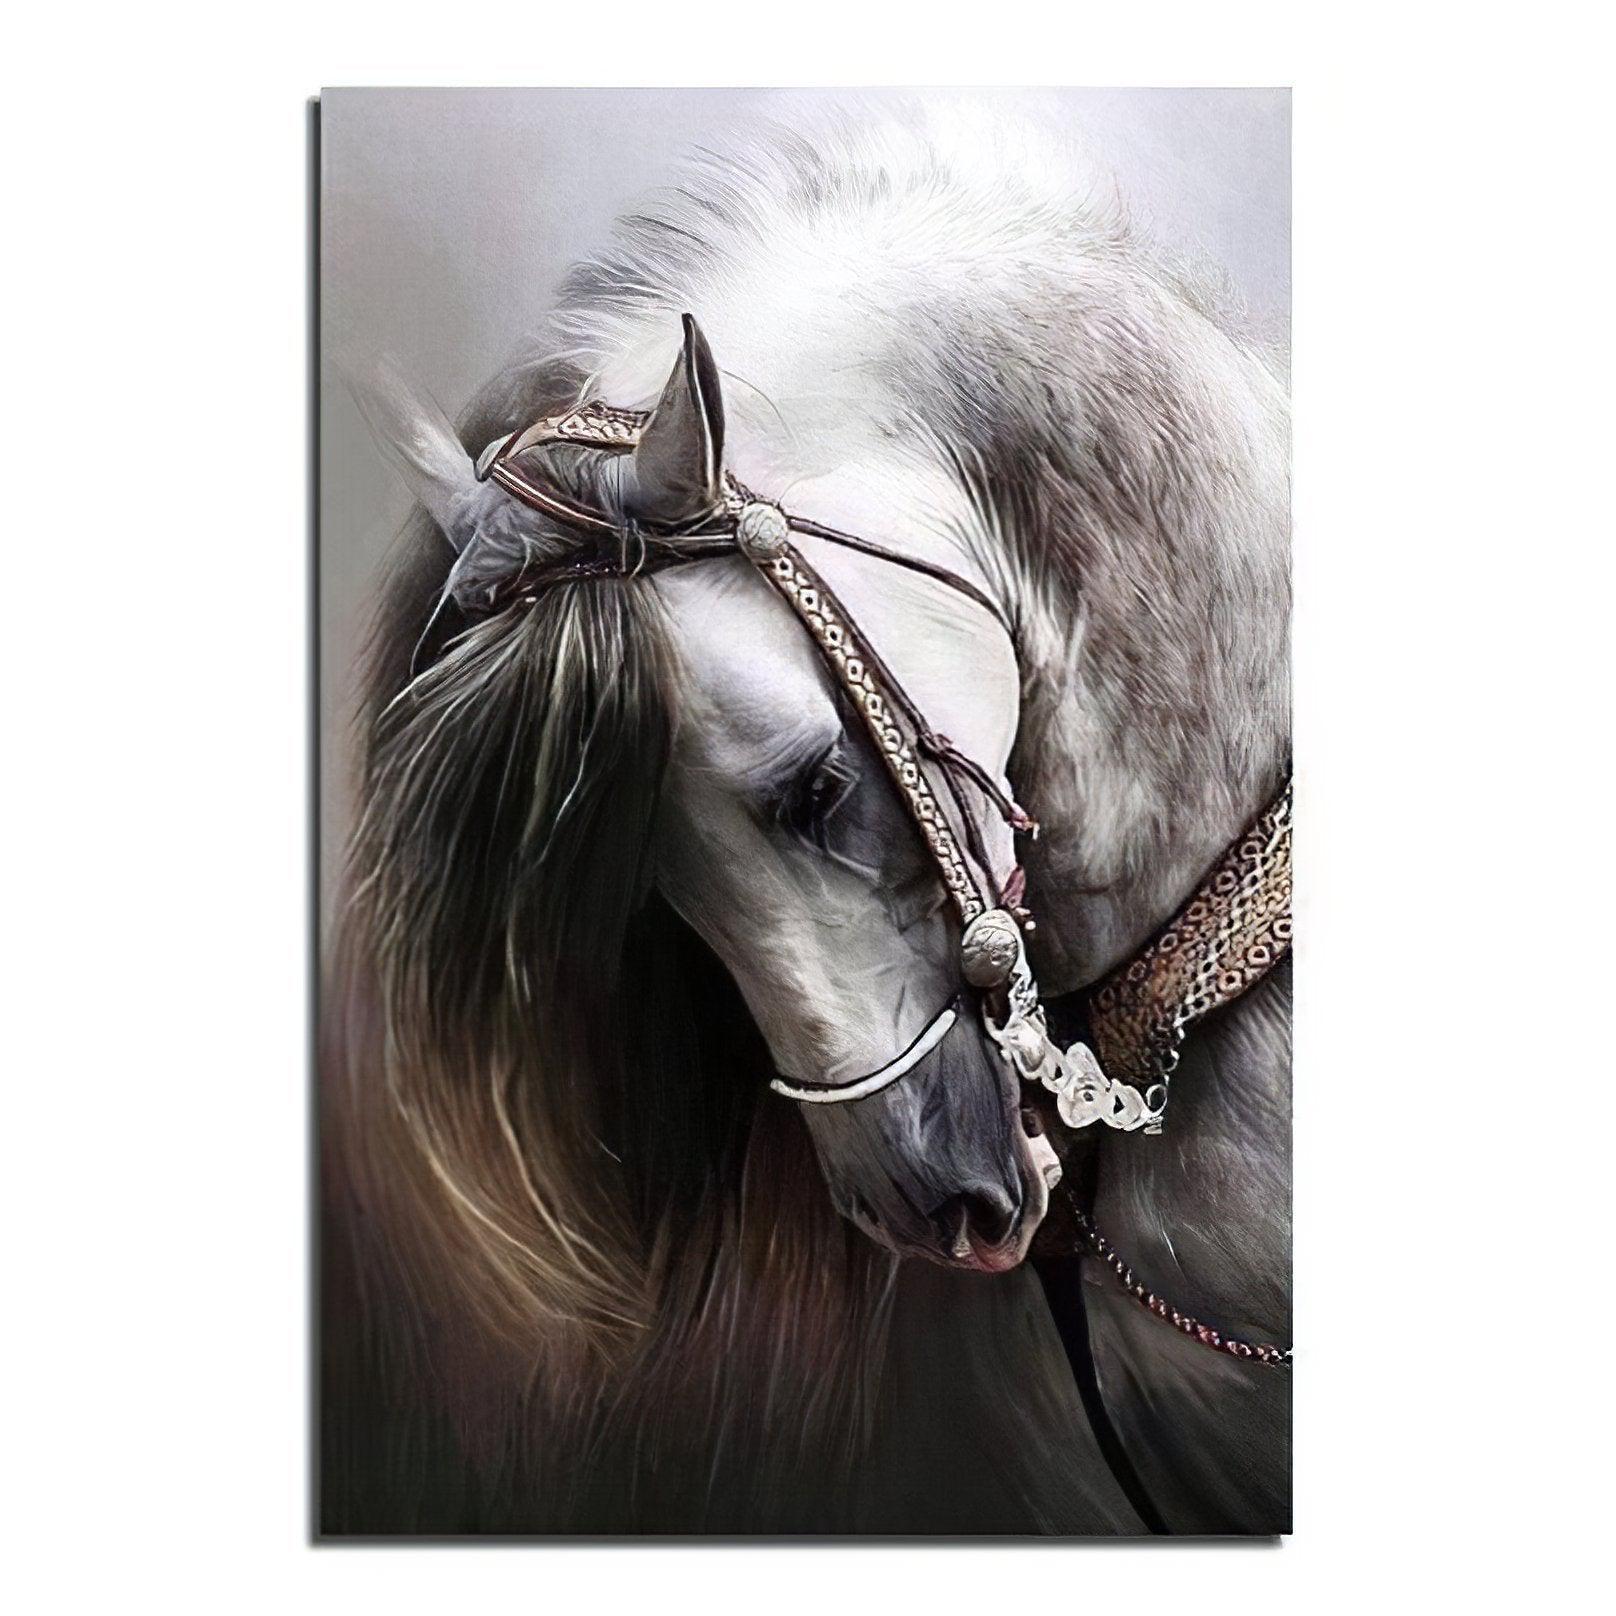 Admire the noble Horse with Badge in detailed art.Horse With Badge - Diamondartlove